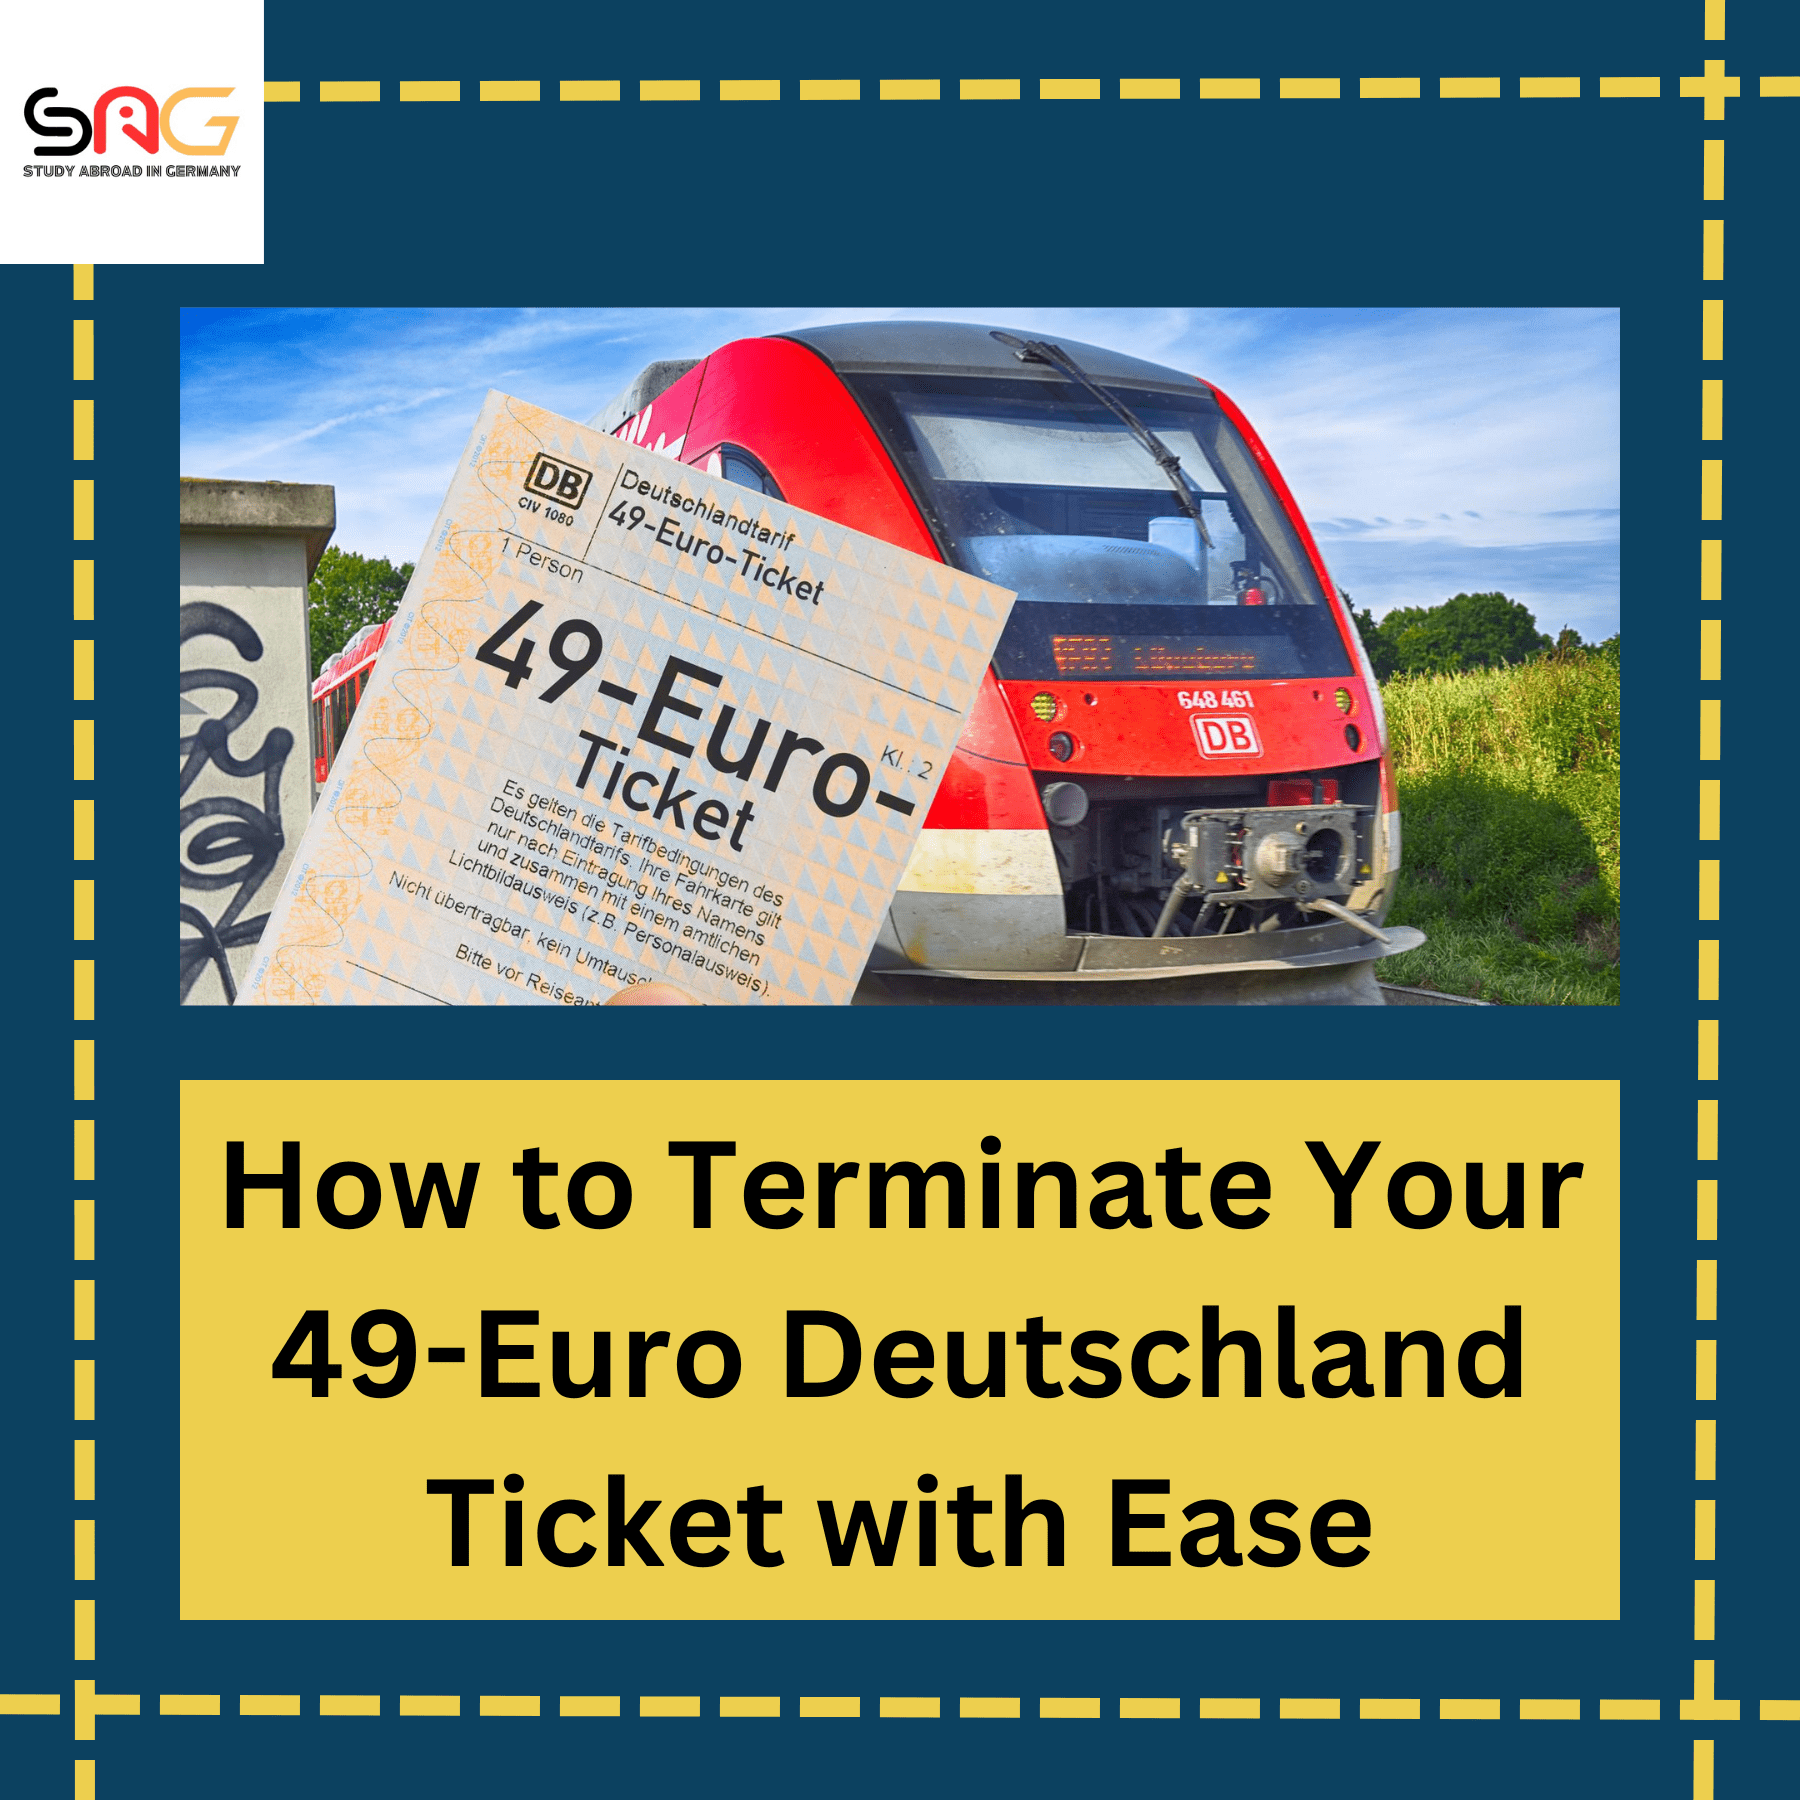 Germany's New Deutschlandticket: All You Need To Know About The 49 Euro Ticket